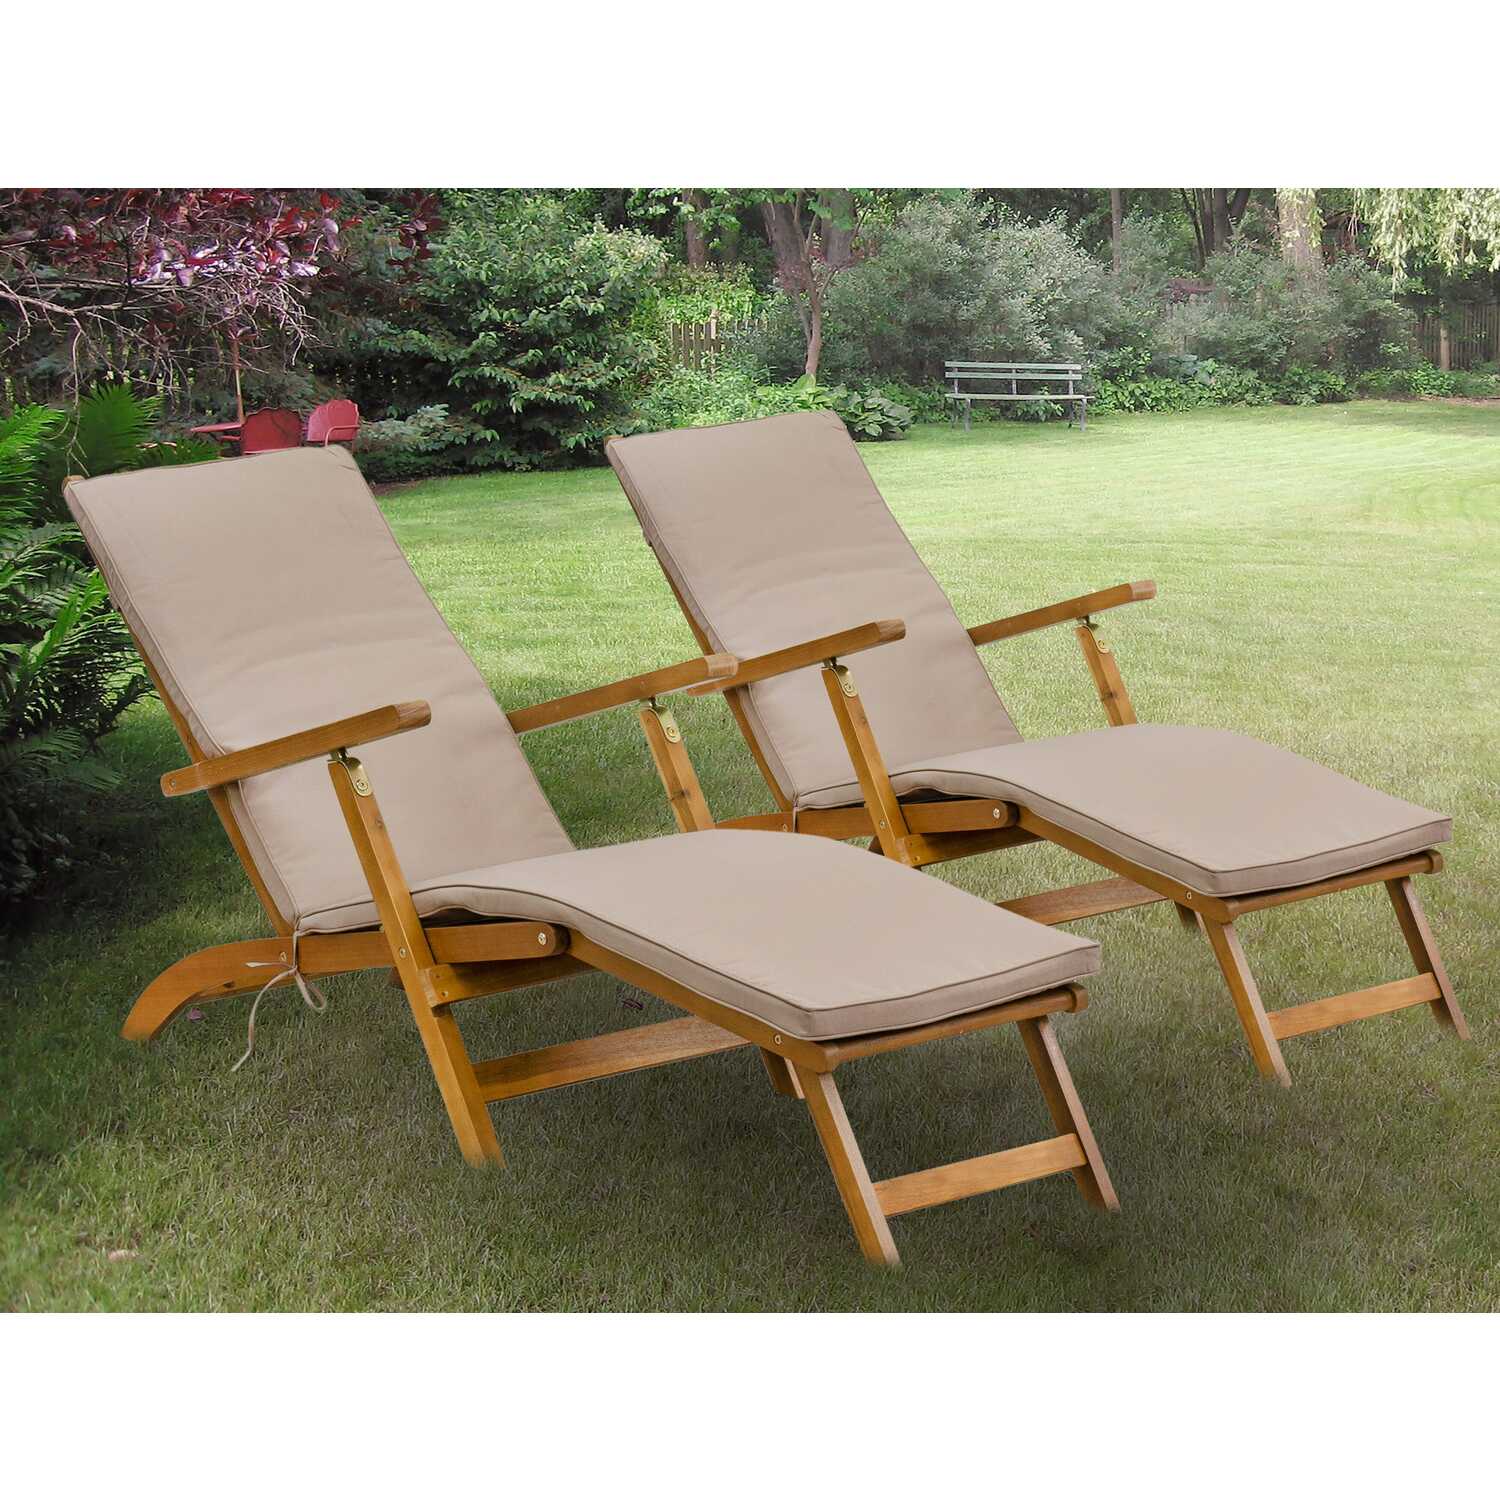 Outdoor Patio Garden Chairs - Salinas Deck Lounger Chairs - Natural Oil Finish - image 3 of 3